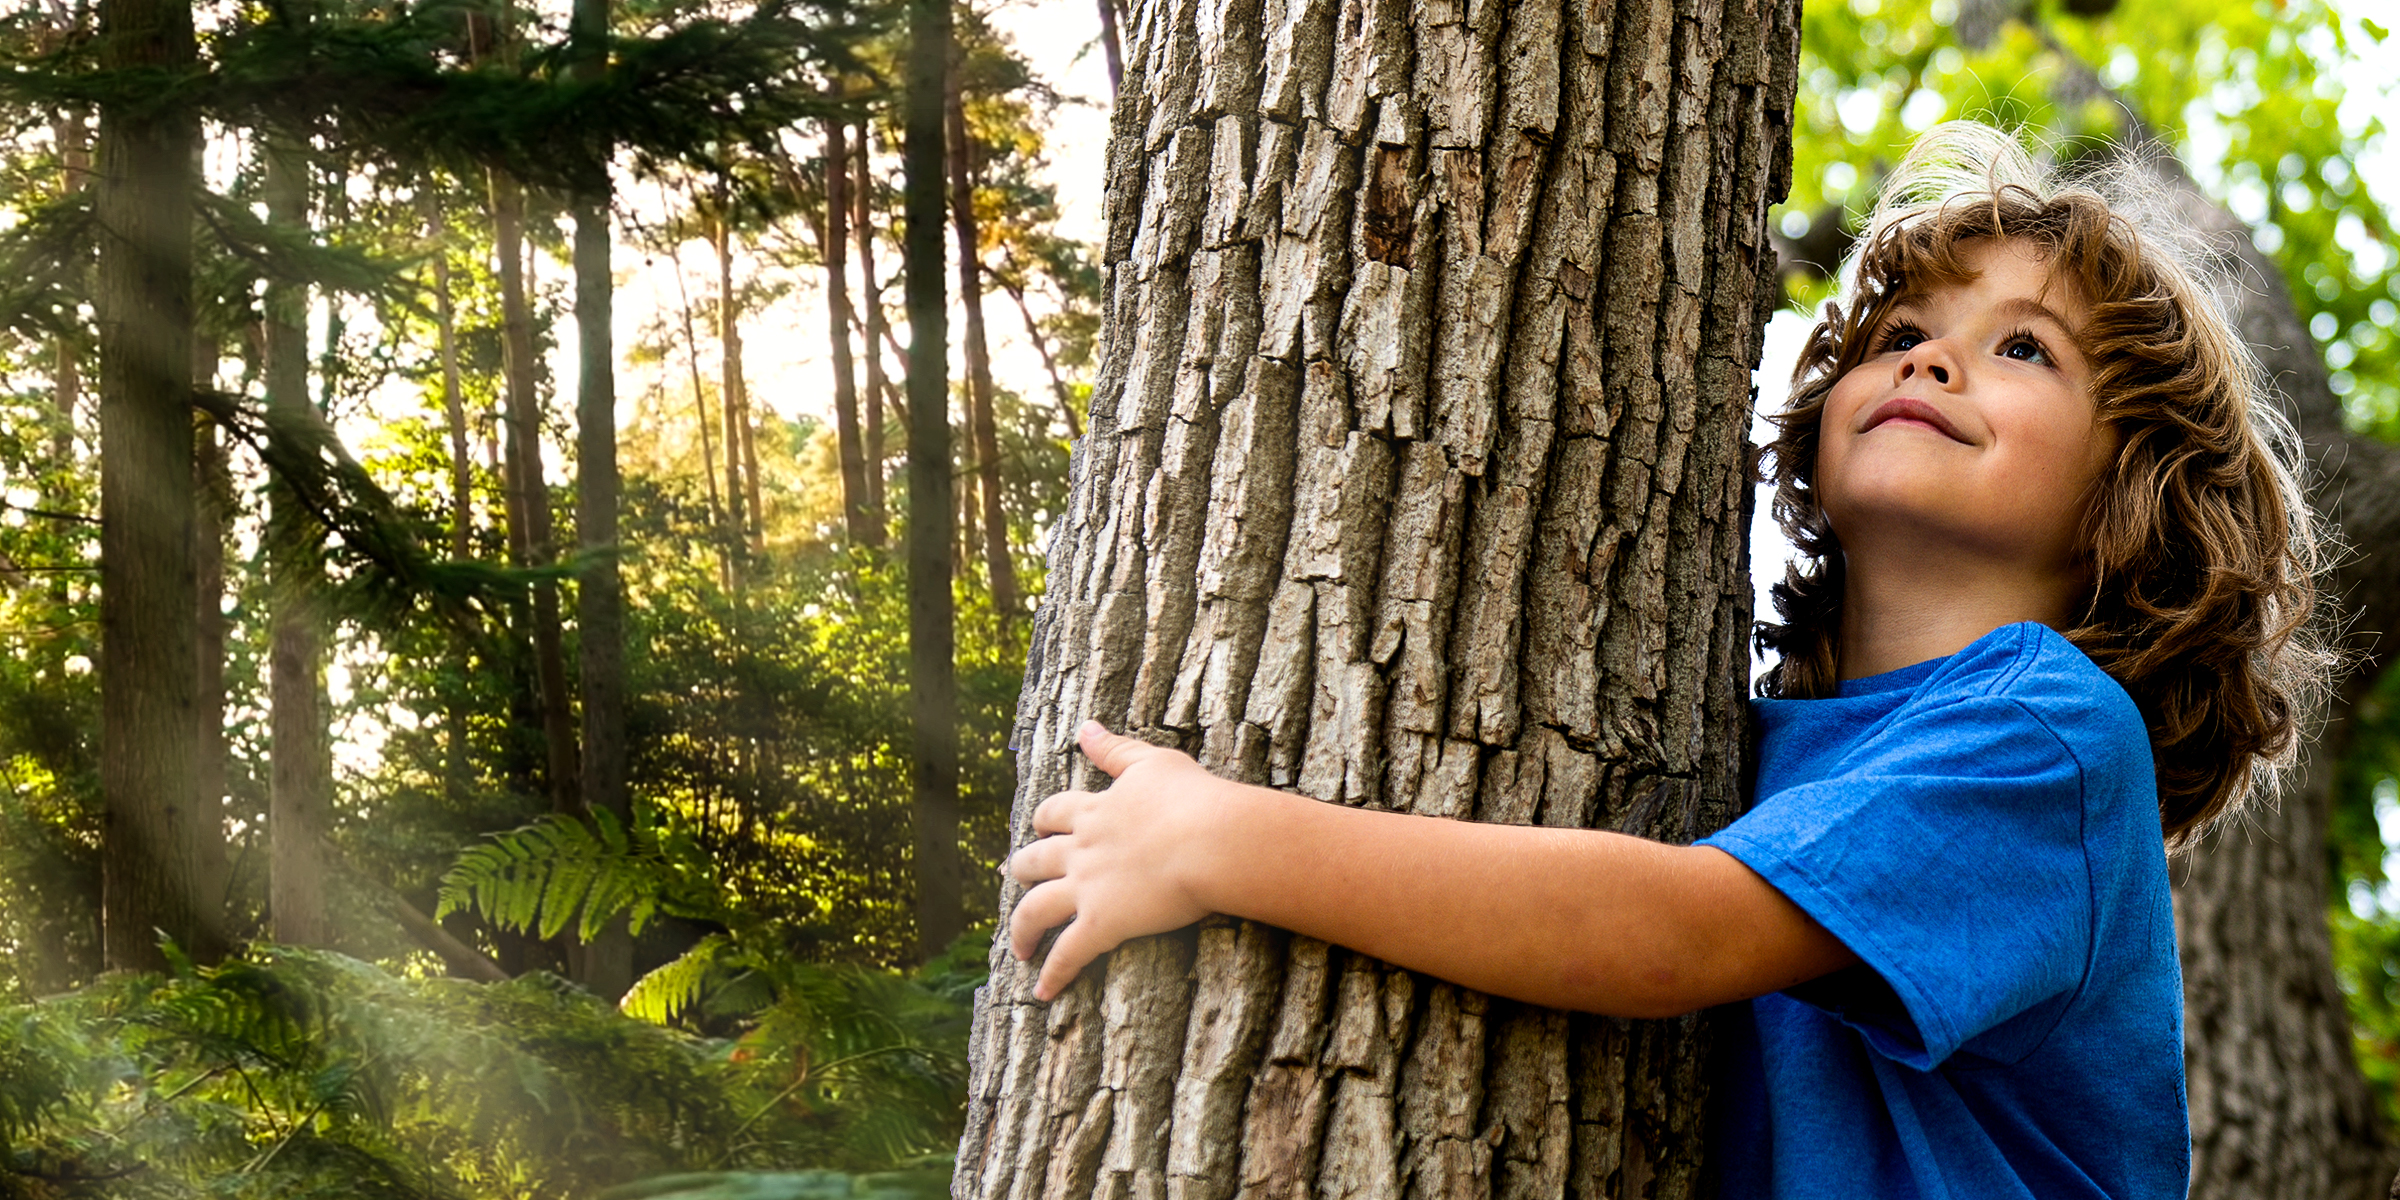 A child hugging a tree | Source: YouTube/Relaxation Film | Shutterstock